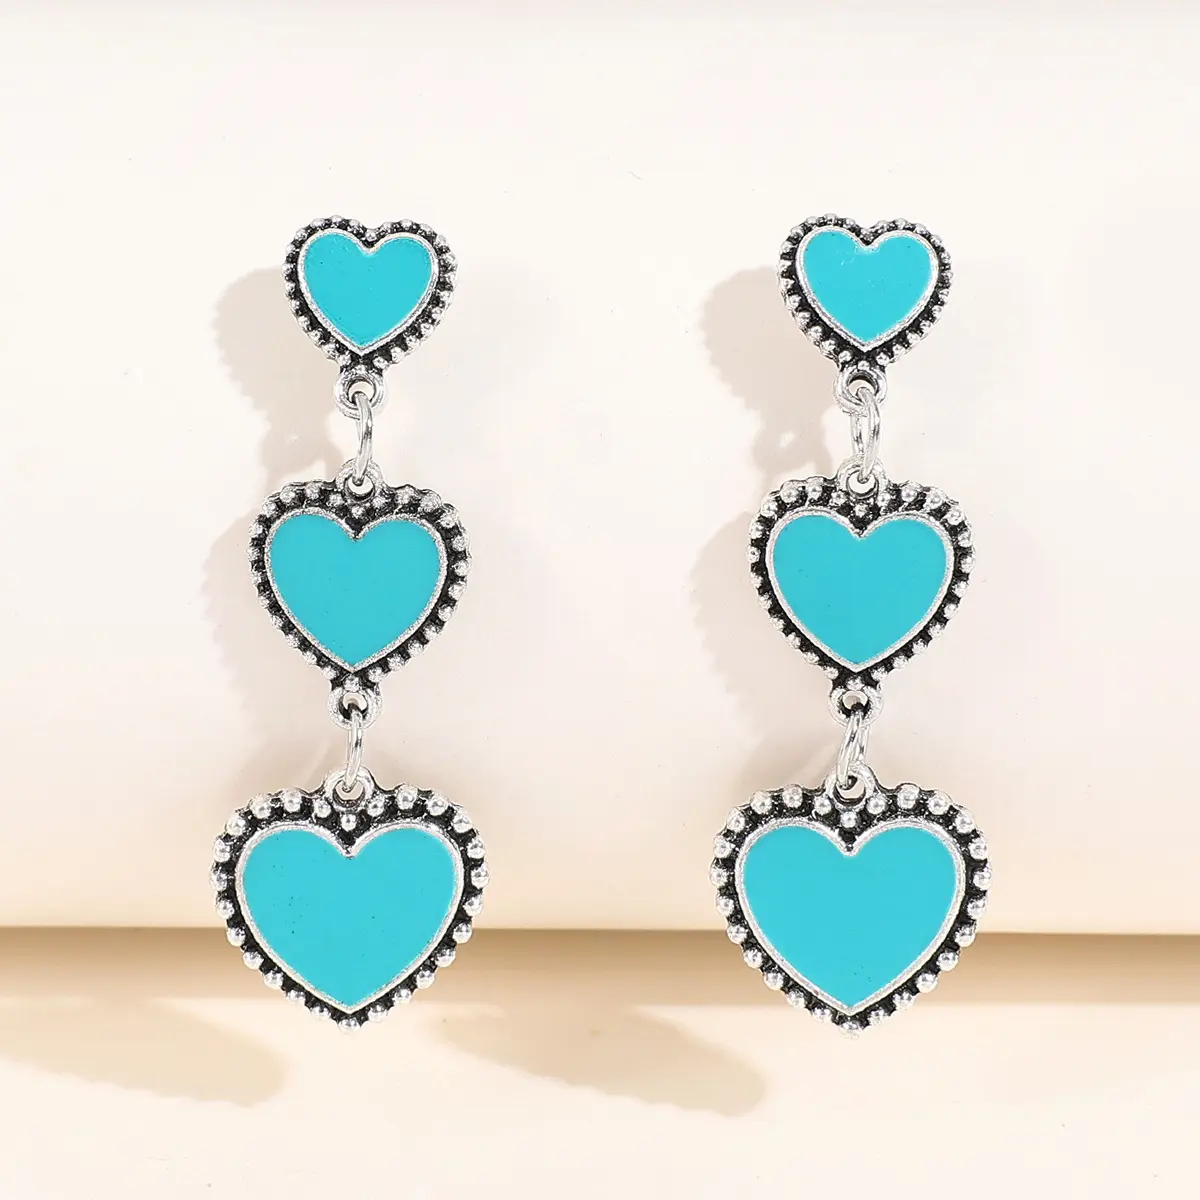 Vintage Alloy Turquoise Love Pendant Long Earrings Valentines Day Heart Jewelry For Women Cute Girl